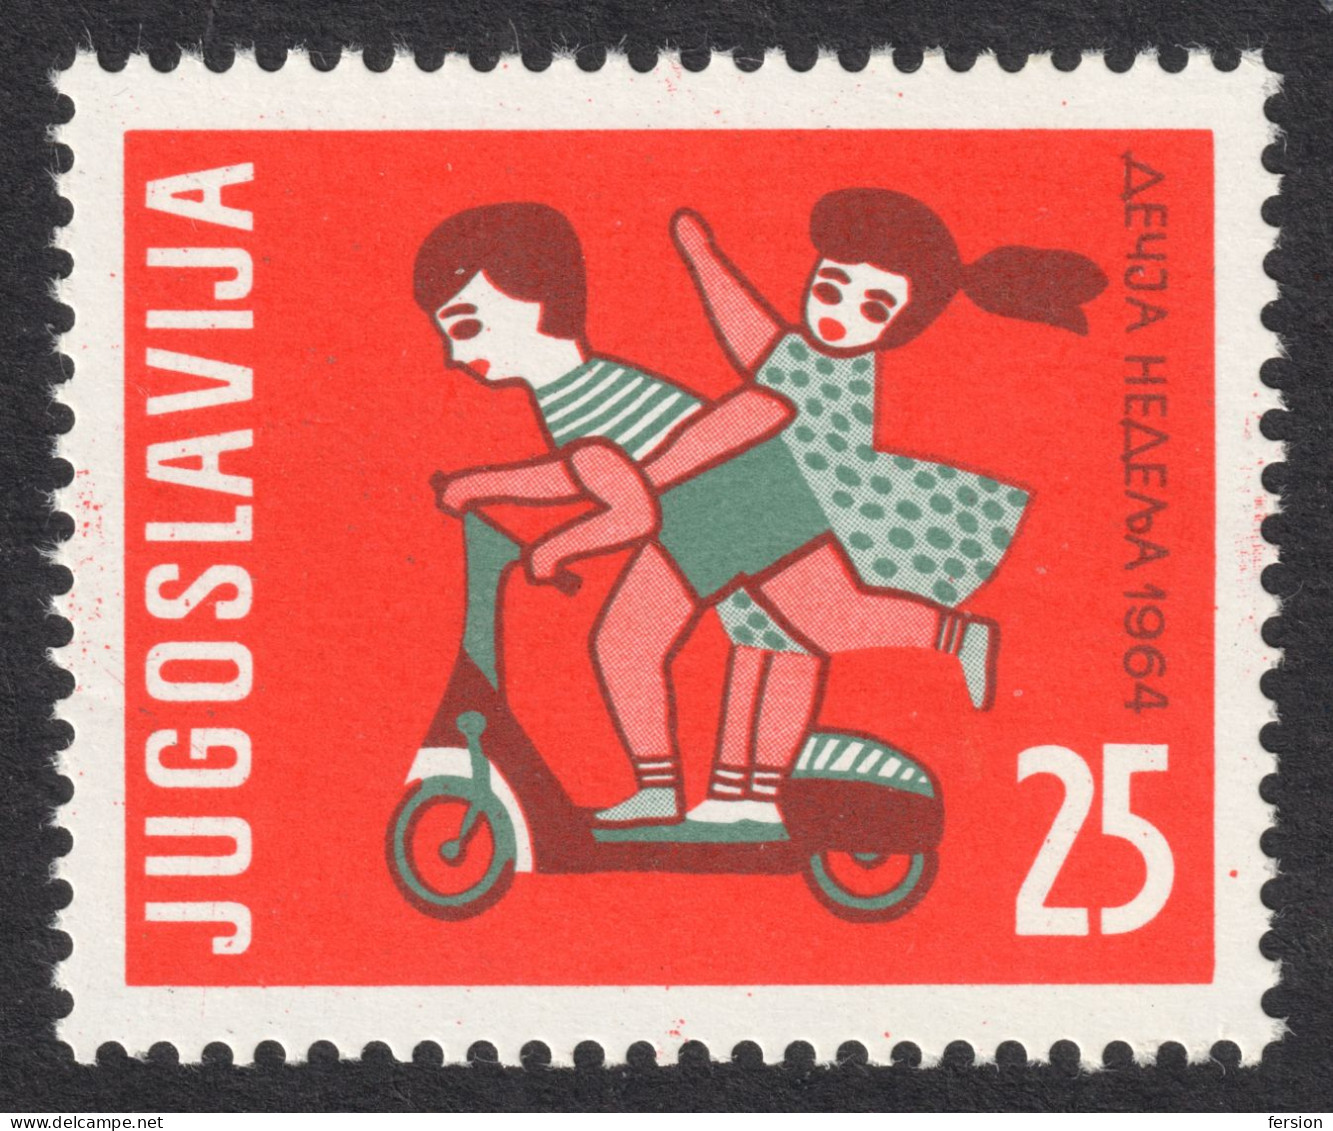 Scooter Motorbike Cycle Moped - USED - 1964 - Yugoslavia - Children Week ADDITIONAL Charity Stamp / Girl Boy - Motorbikes